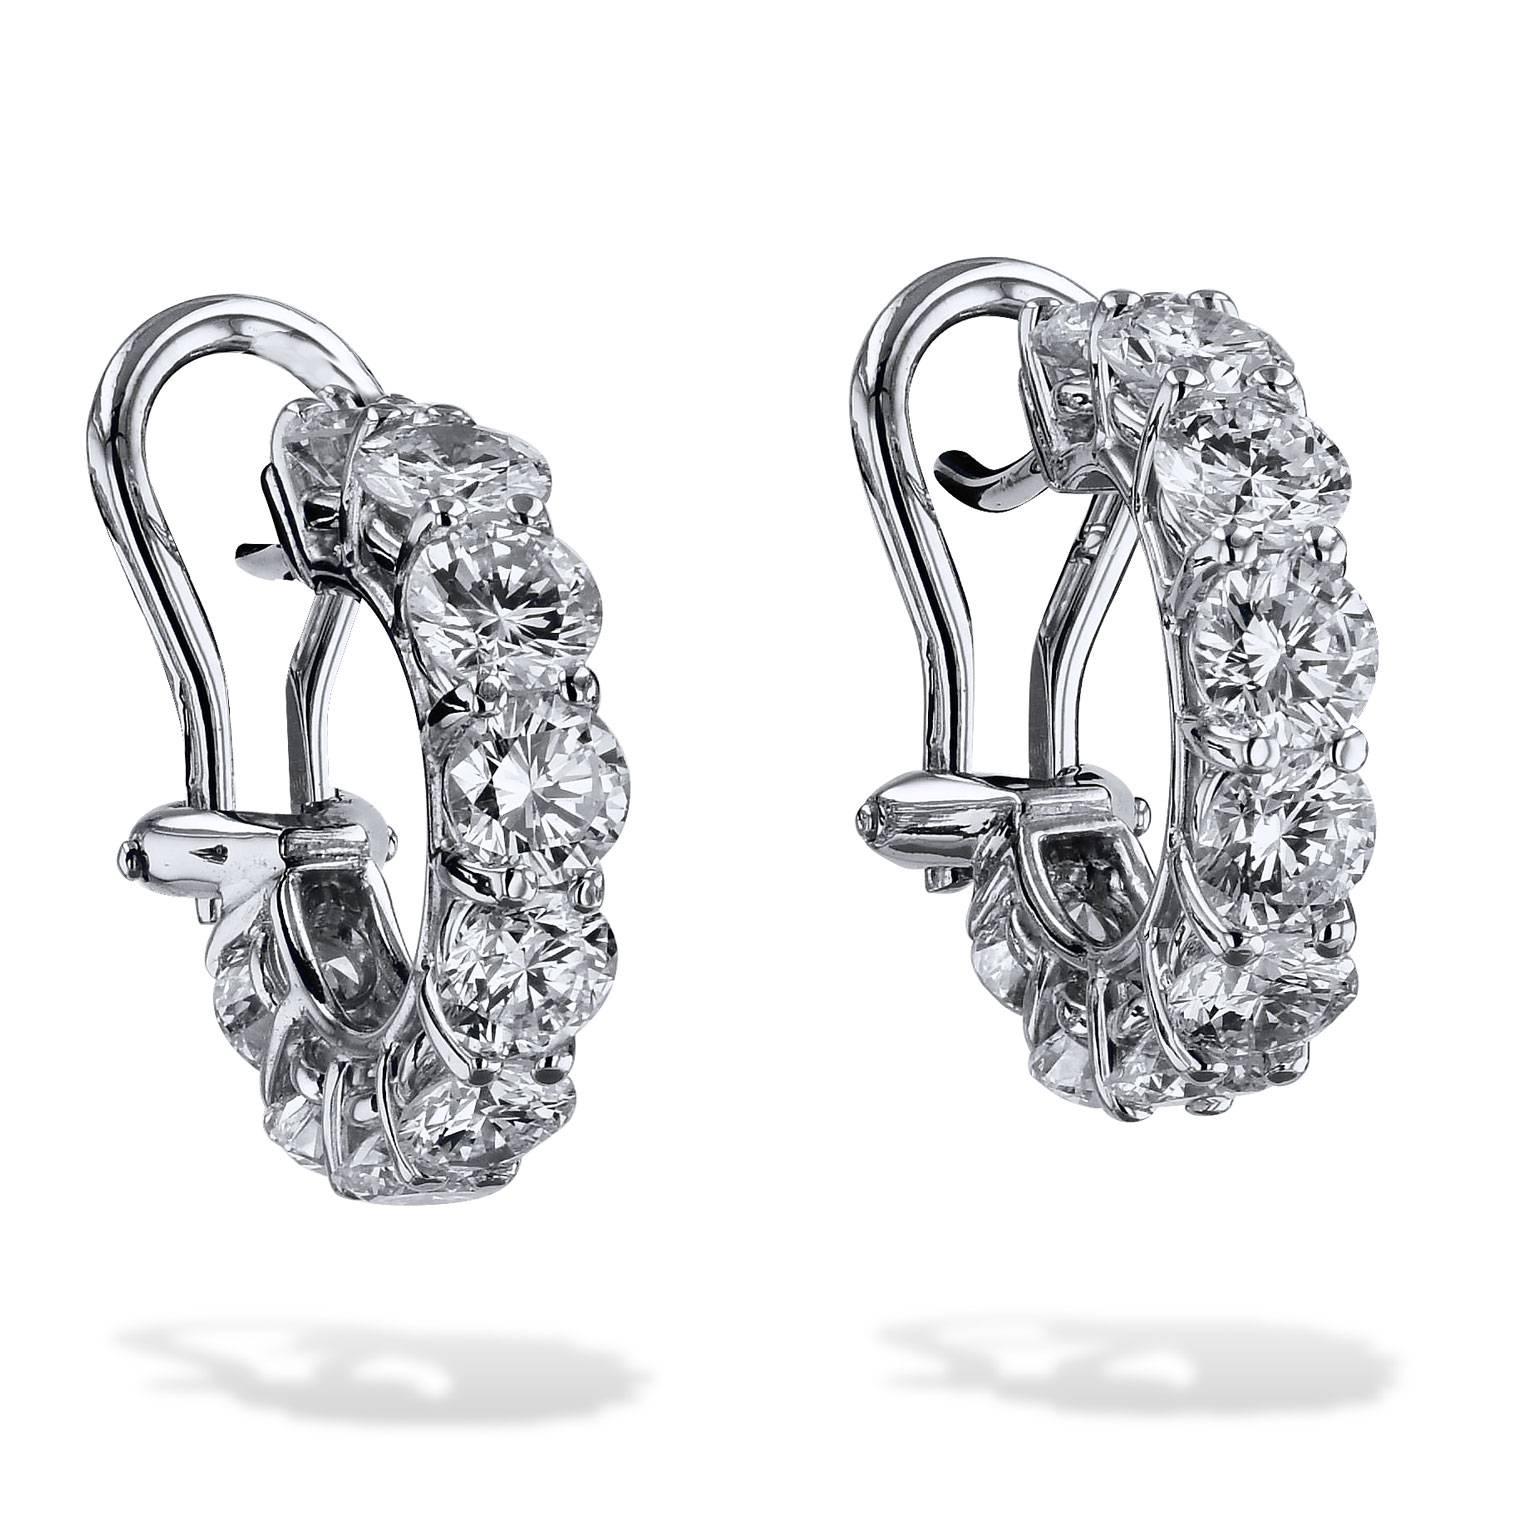 Fashioned in 18 karat white gold and handmade by H, these diamond lever-back hoop earrings feature 4.03 carat of prong-set round diamond and each stone weighs 0.22 carat on average. Get lost in the shine and shimmer of these hoop earrings.